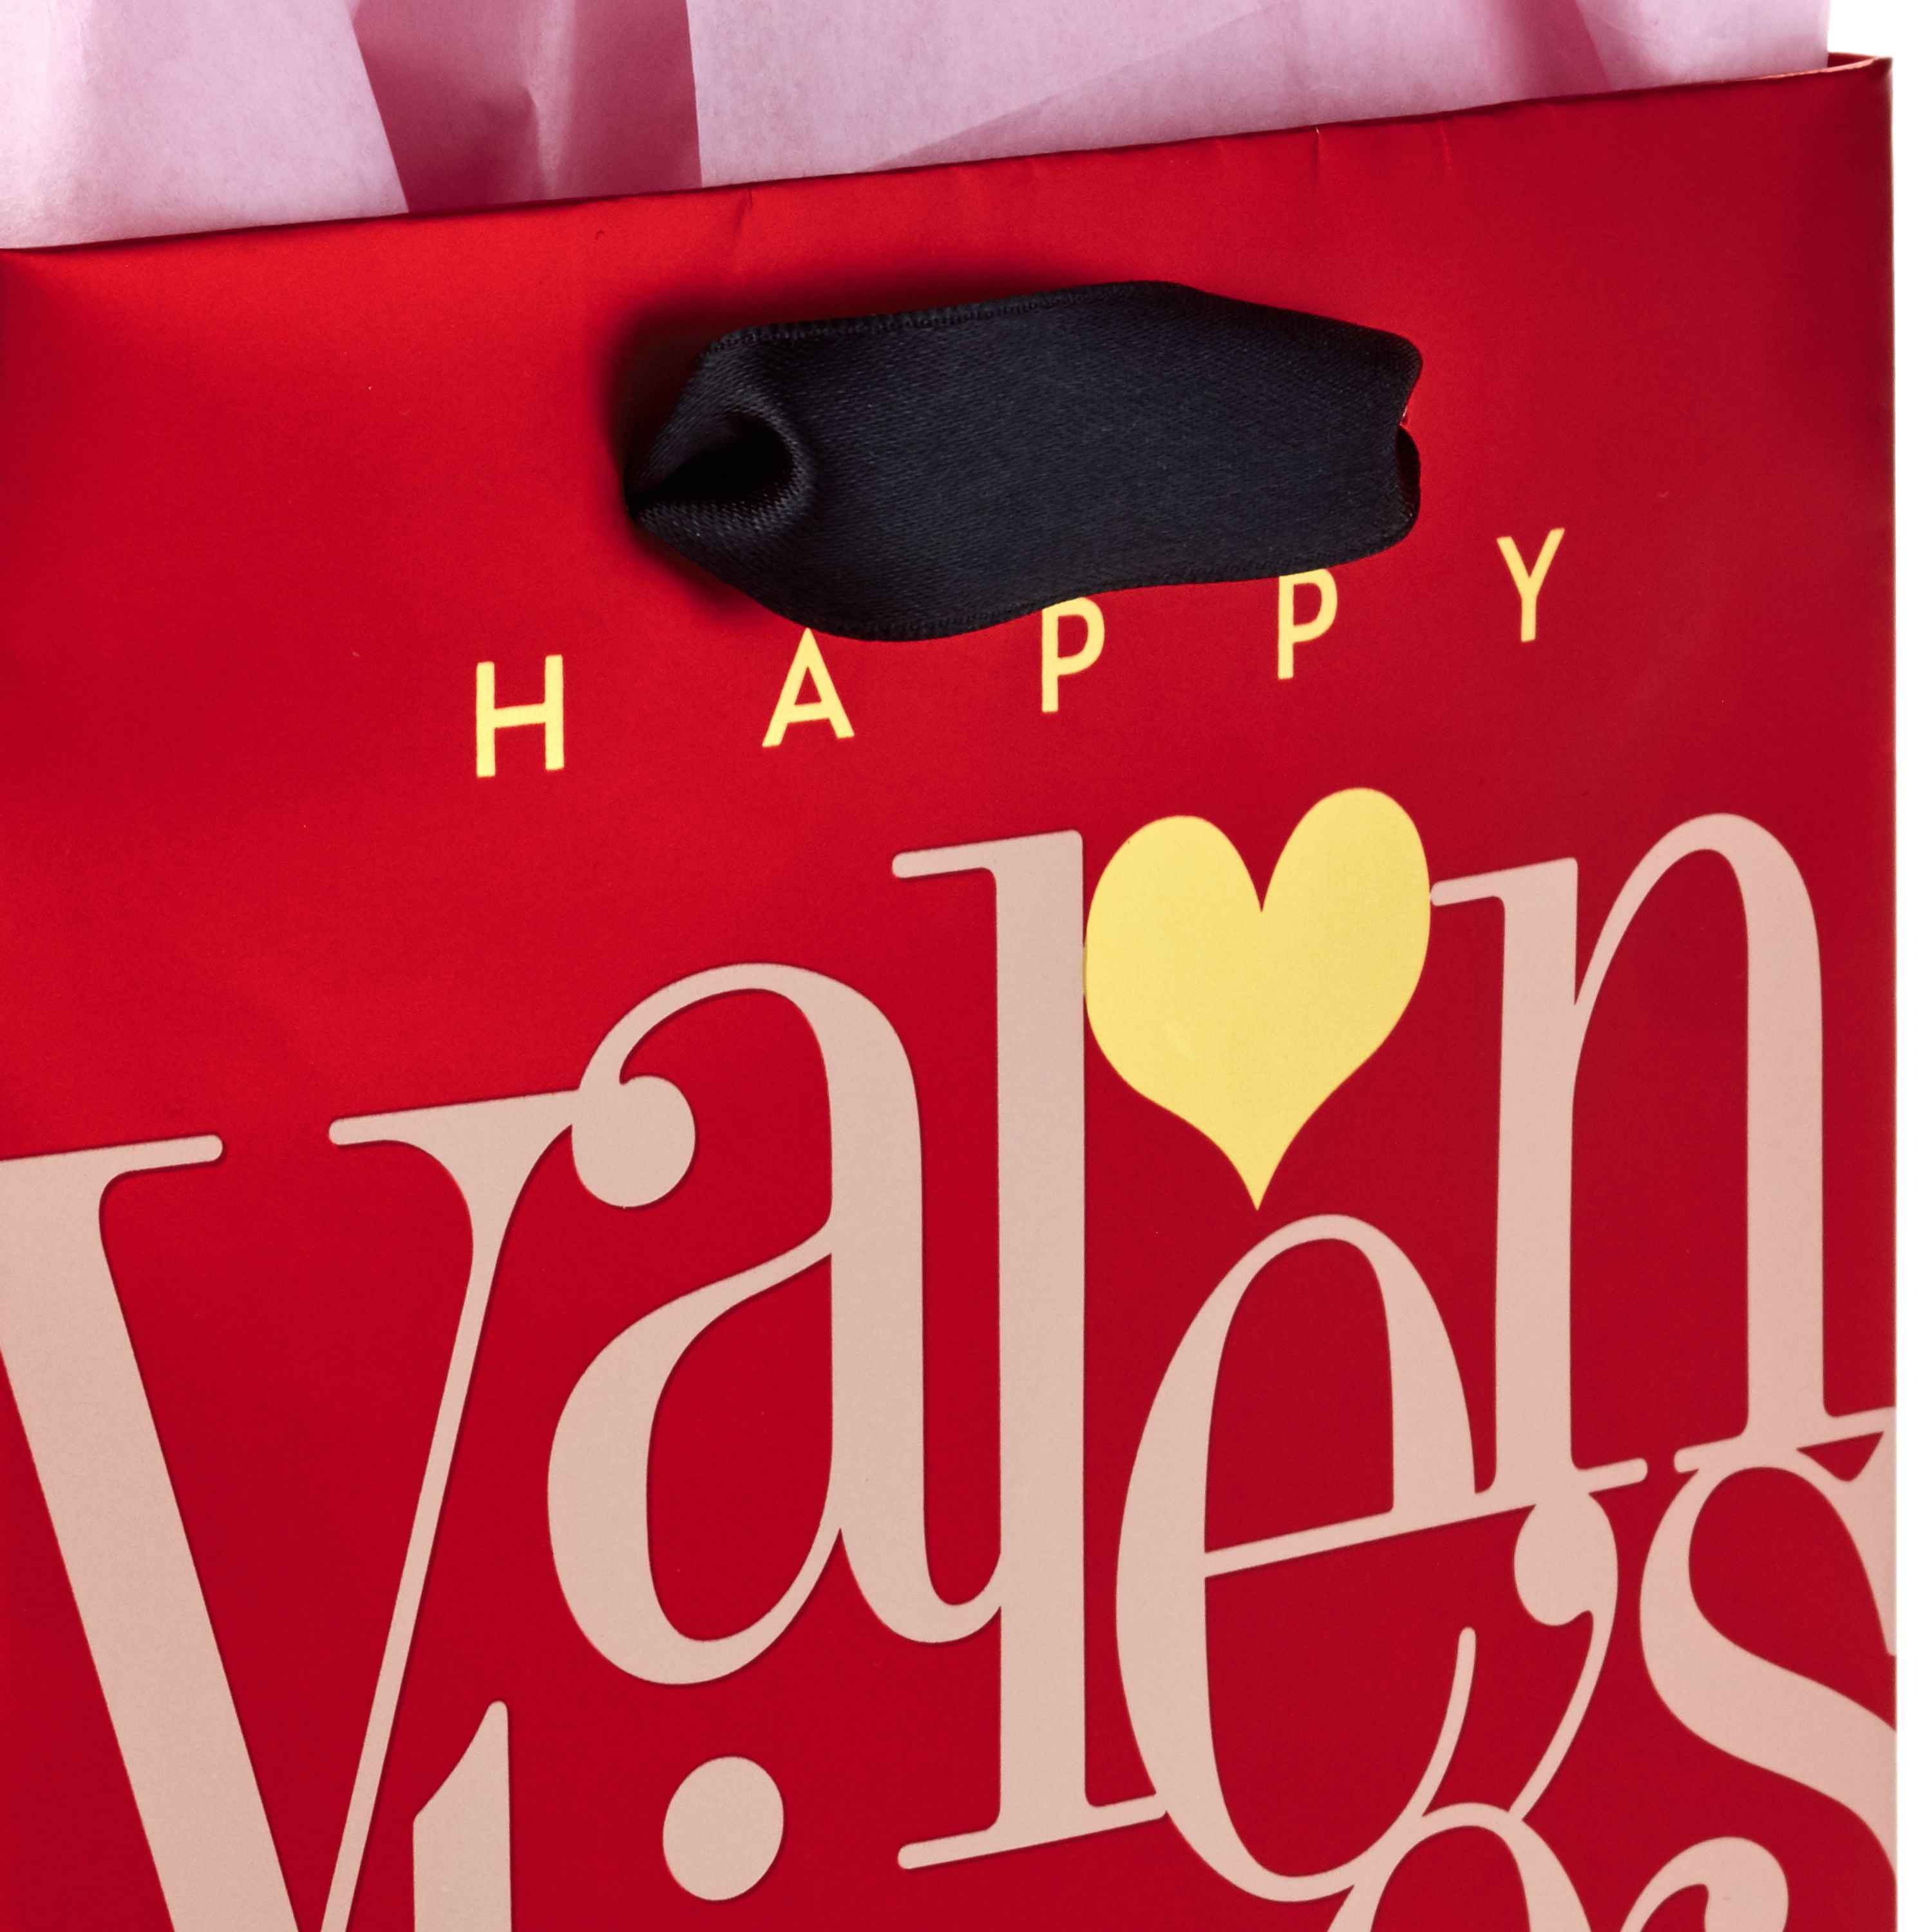 ❤️ VALENTINES GRAB BAG - HEATHER RED & HEATHER HELICONIA PINK